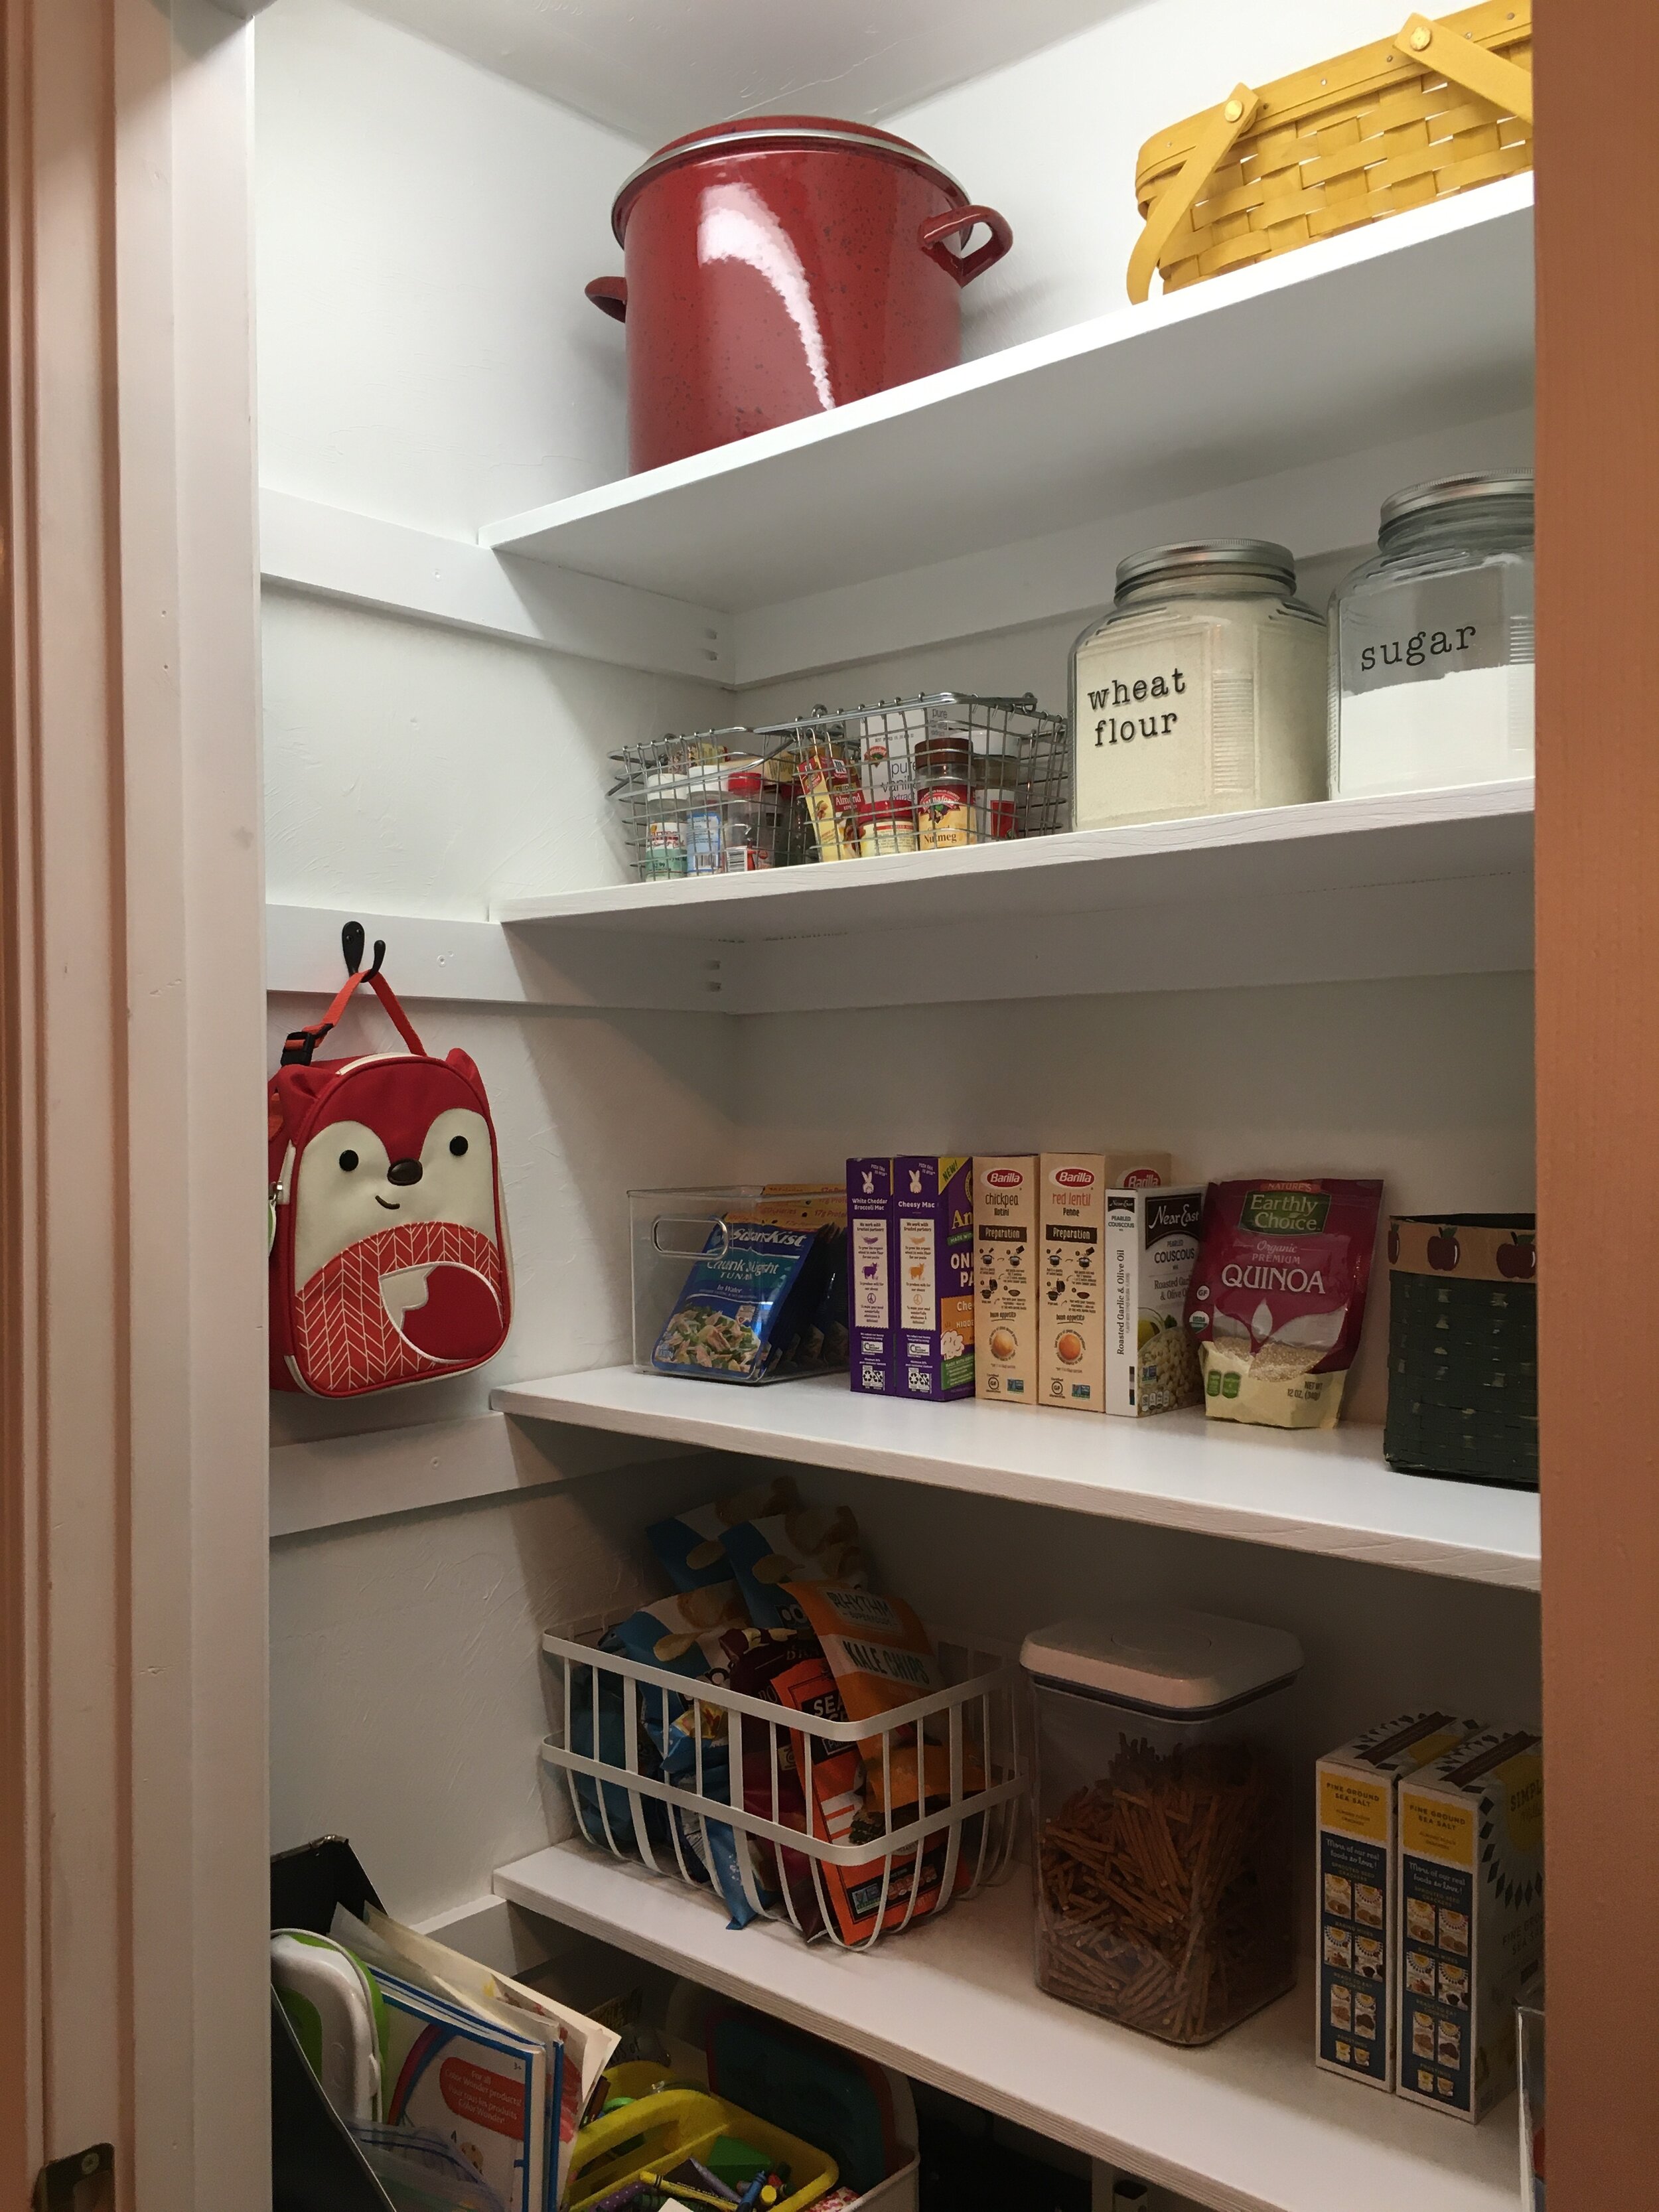 Making the Most of a Closet Pantry